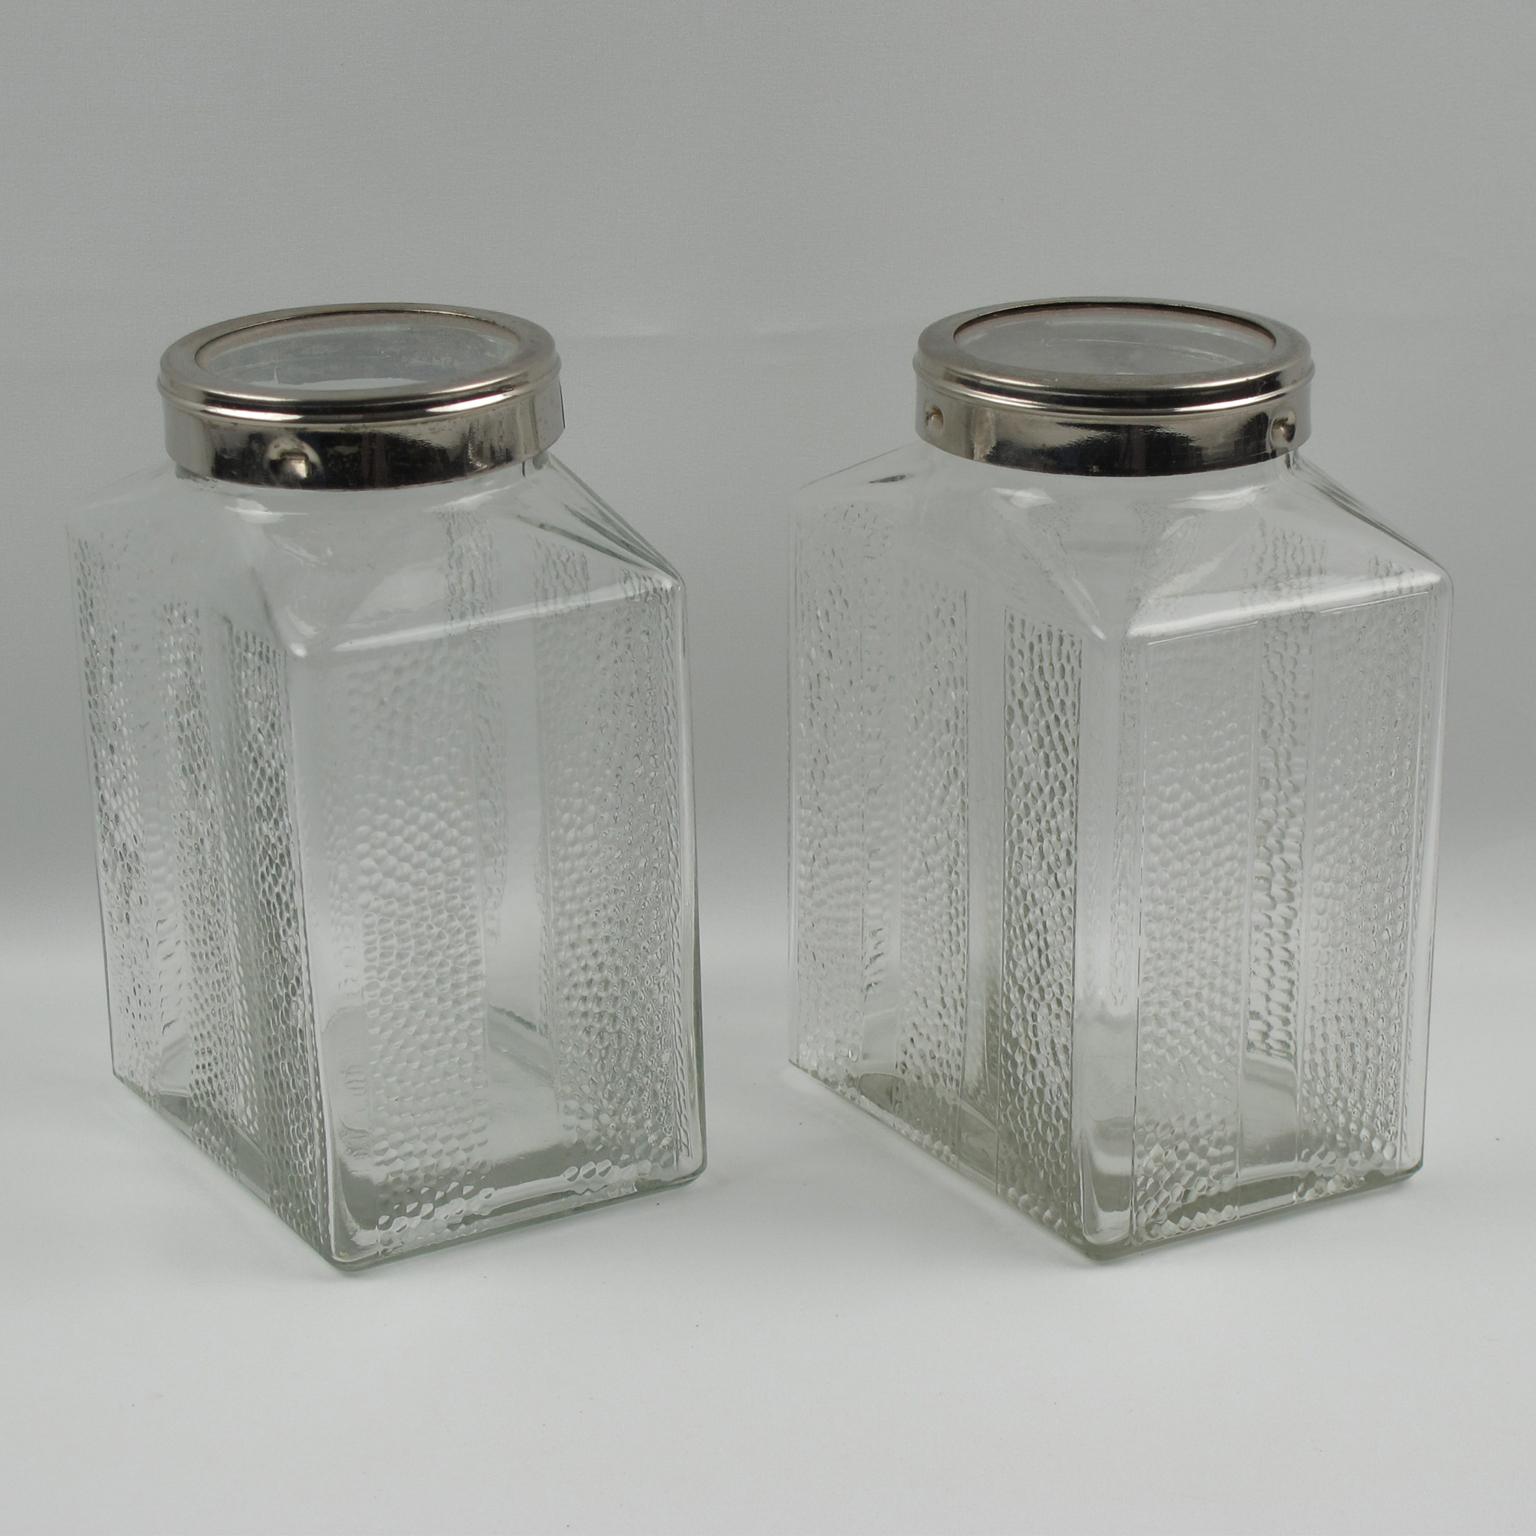 A lovely Art Deco kitchen canister jar set of two pieces. They feature a large-size container with a geometric shape. The molded glass container with a typical Art Deco design is topped with a screw lid in chromed metal. Marked underside: Allemagne